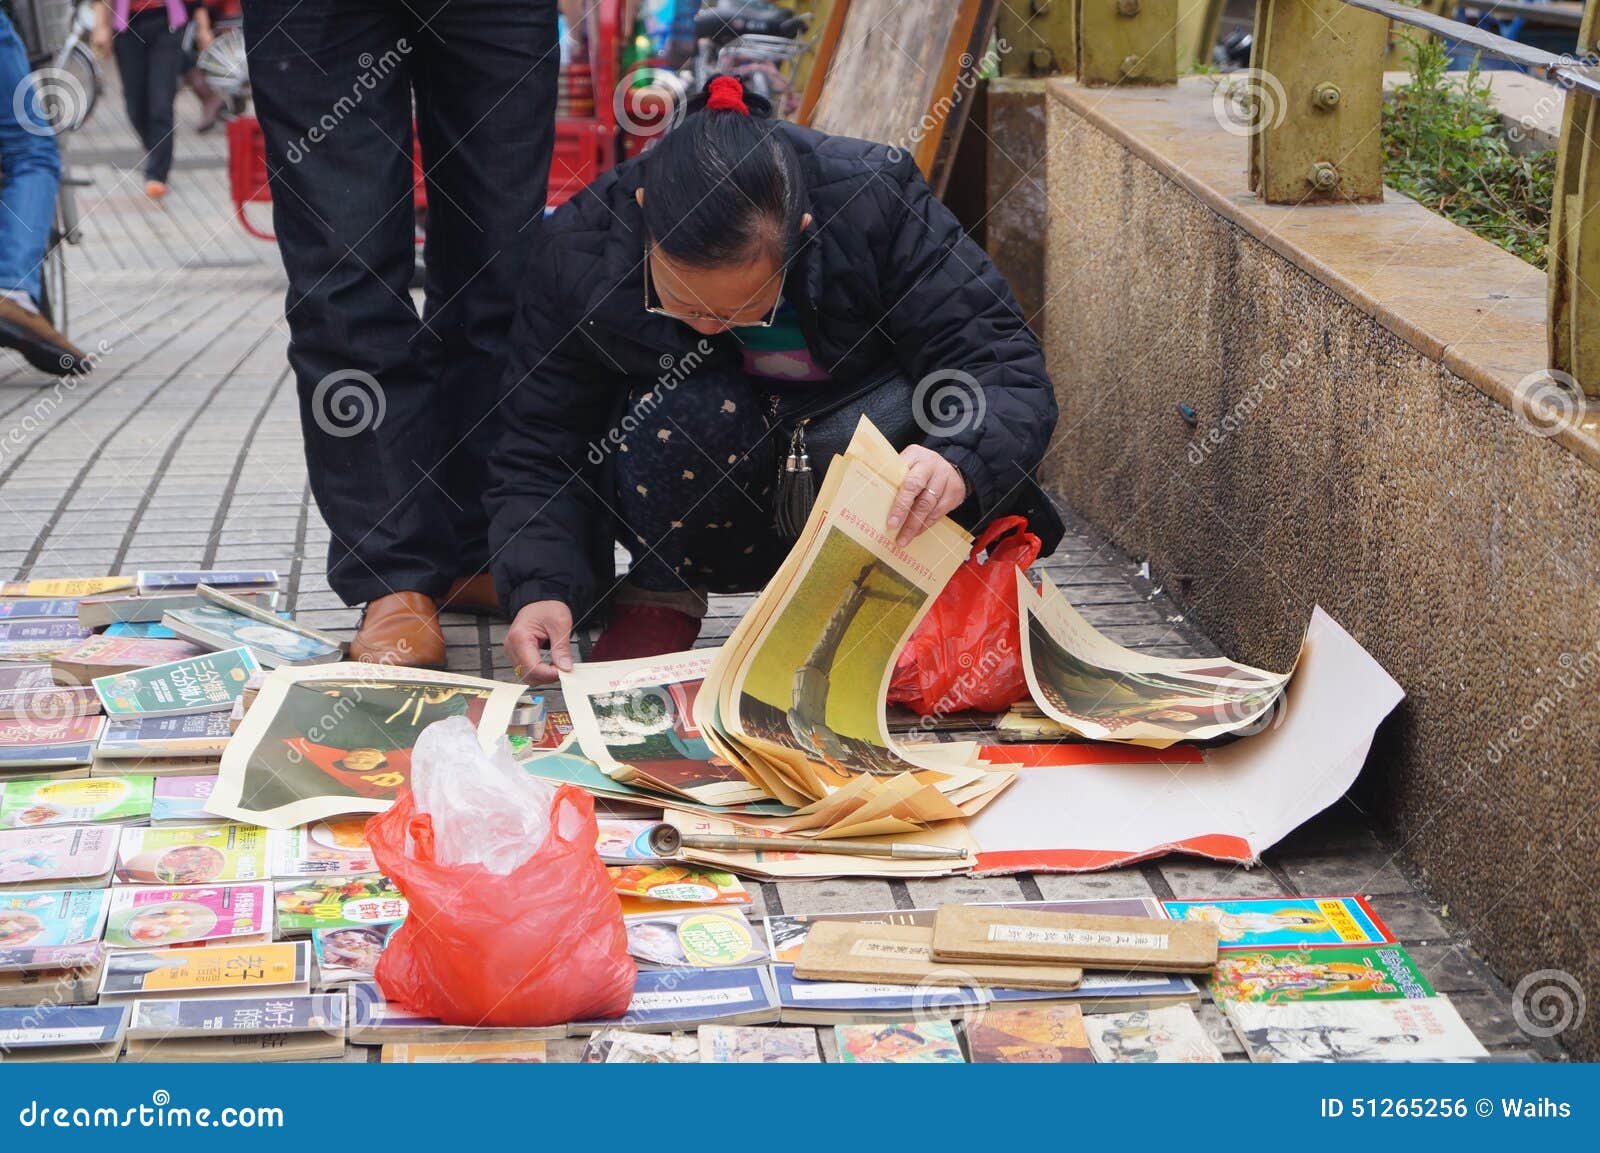 Old Newspapers and Books for Sale Editorial Photo   Image of ...